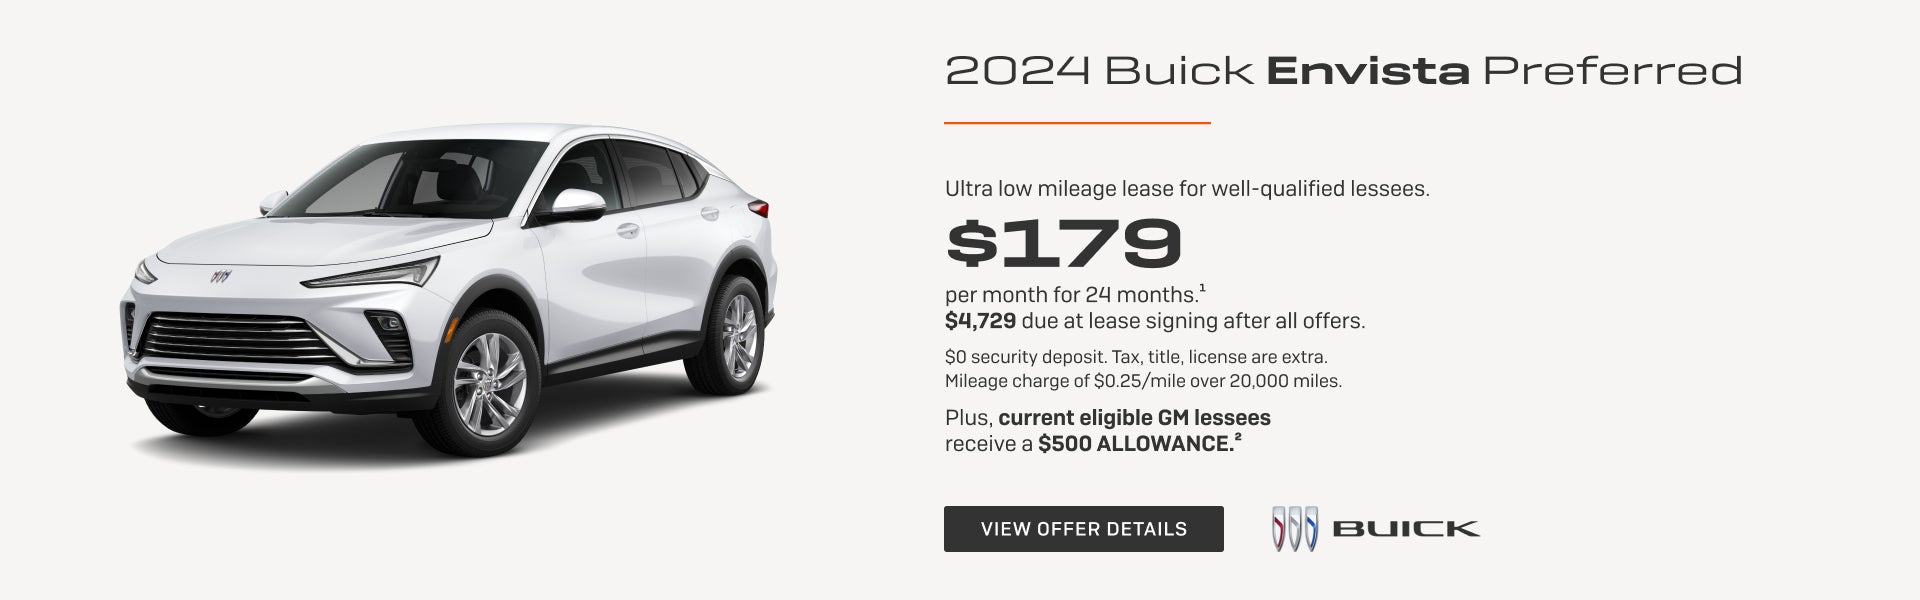 Ultra low mileage lease for well-qualified lessees.

$179 per month for 24 months.1 

$4,729 due ...